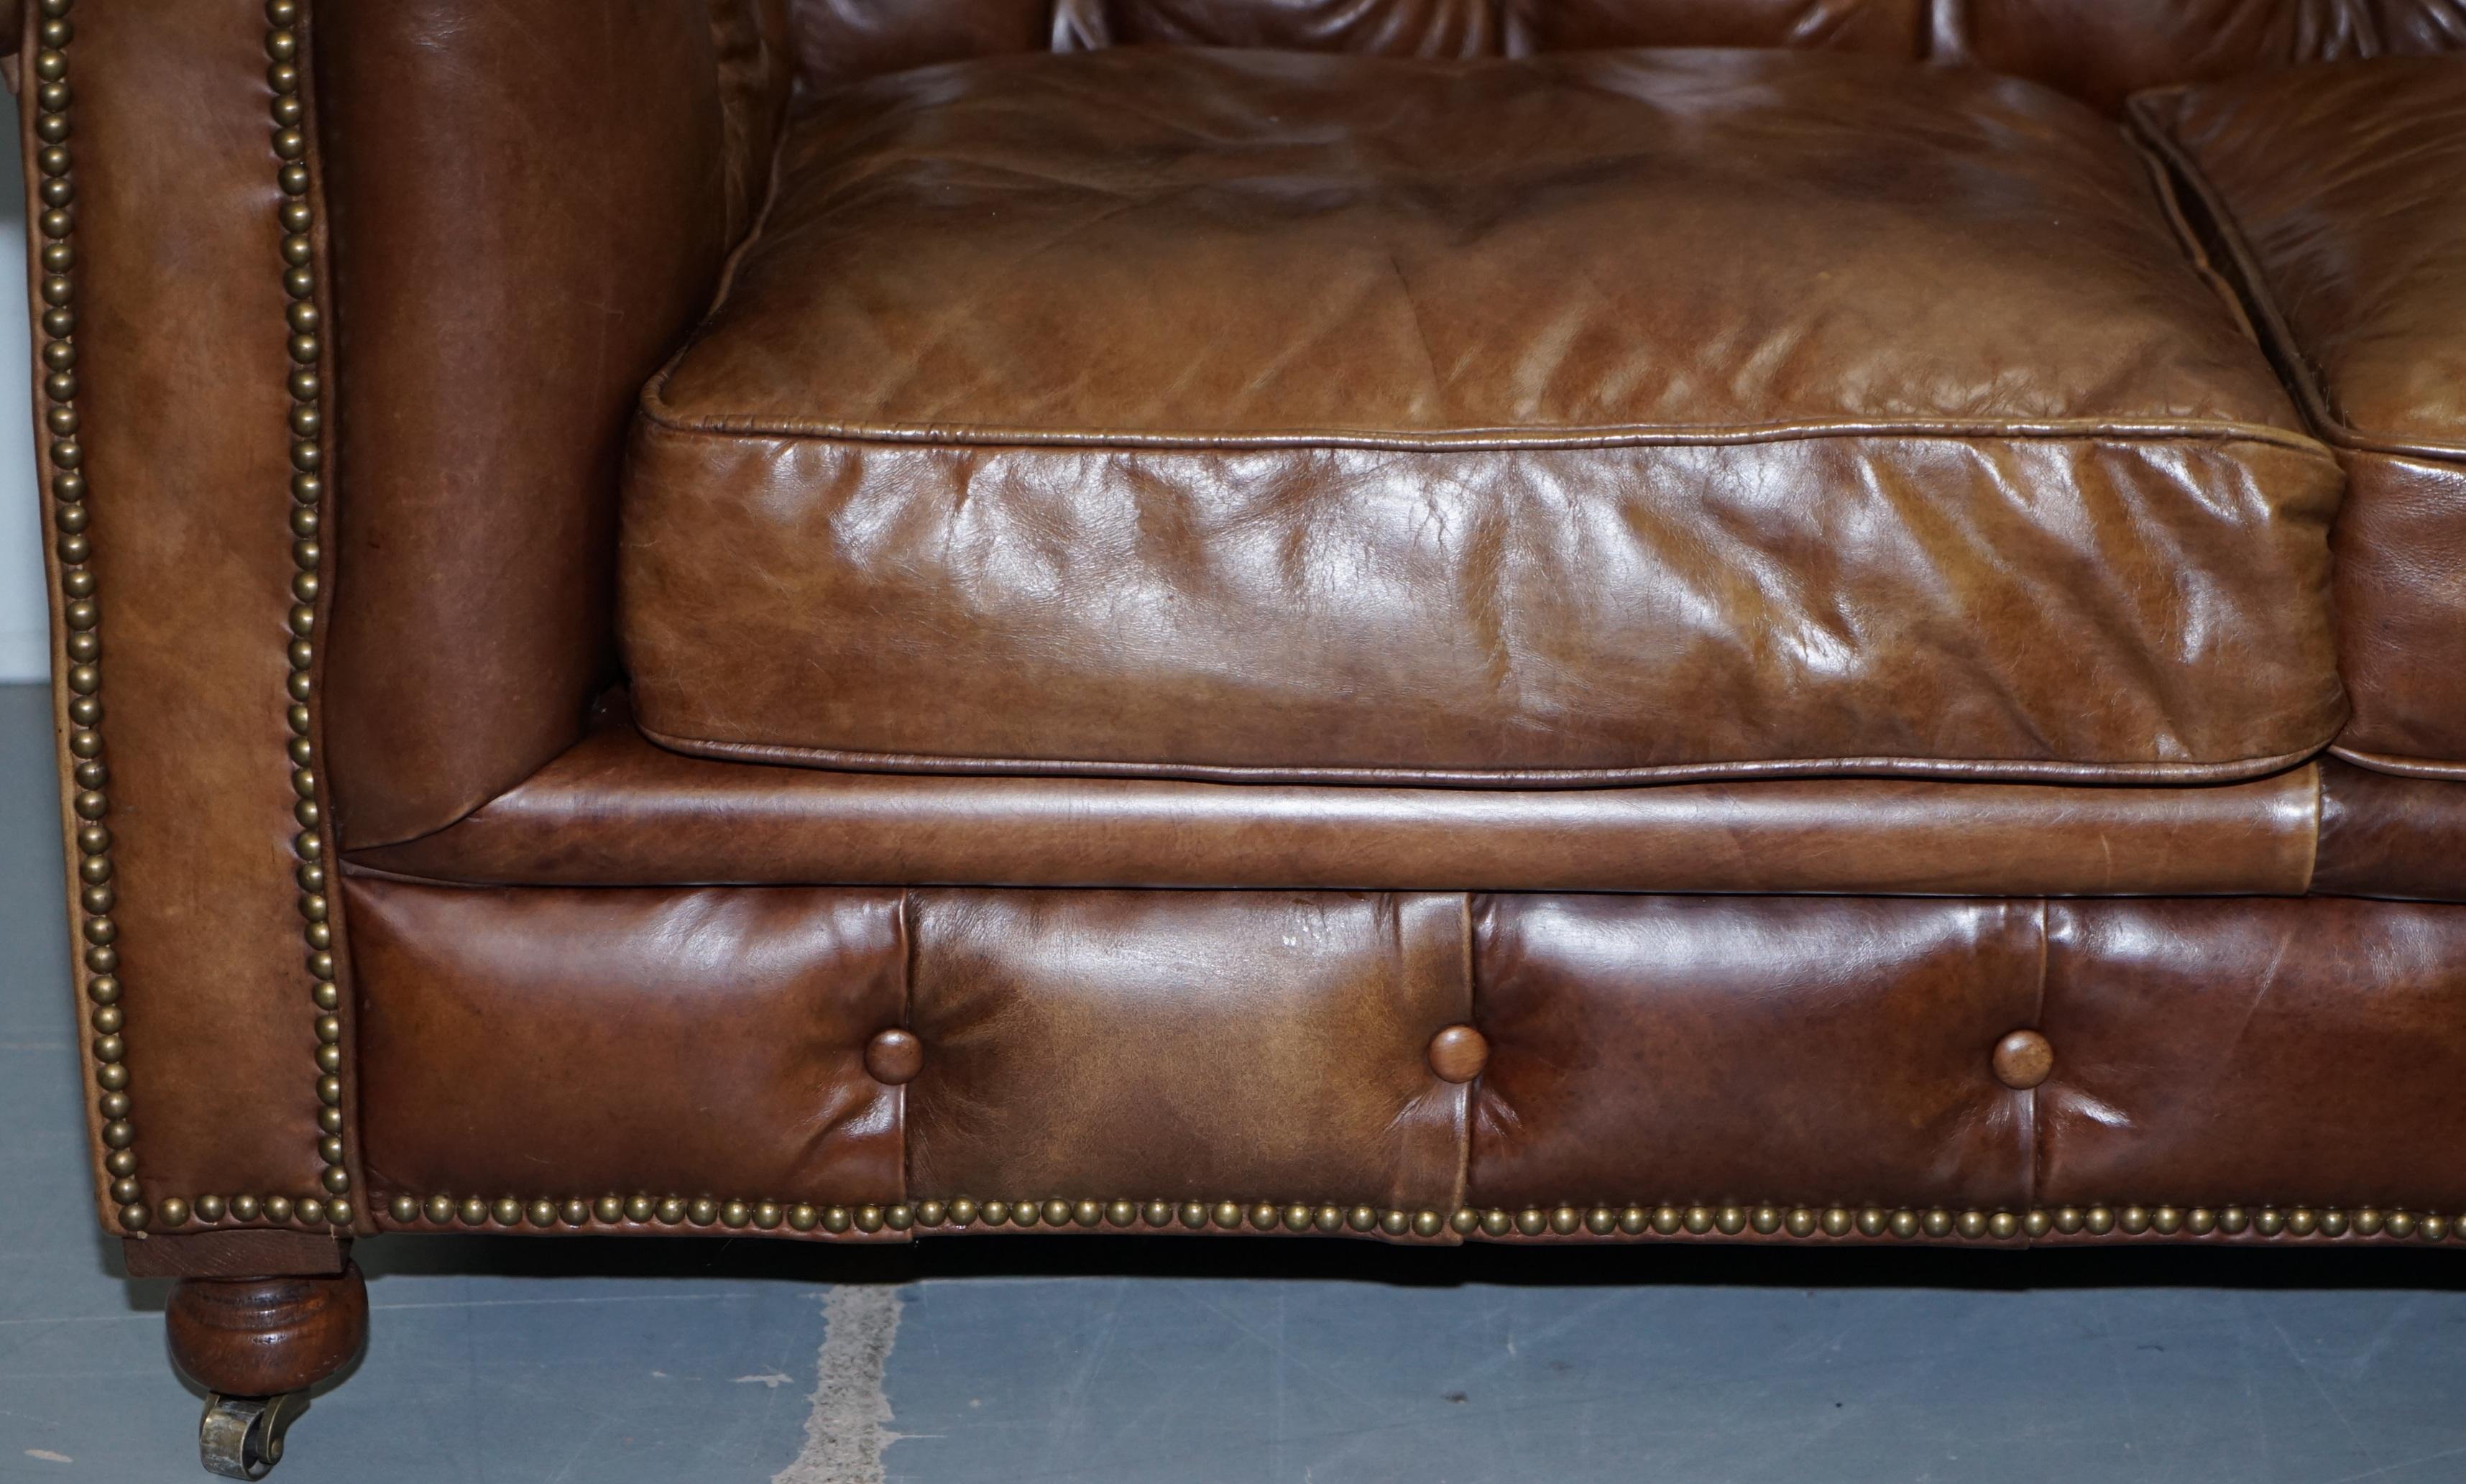 1 of 2 Timothy Oulton Halo Westminster Brown Leather Chesterfield Sofas 3